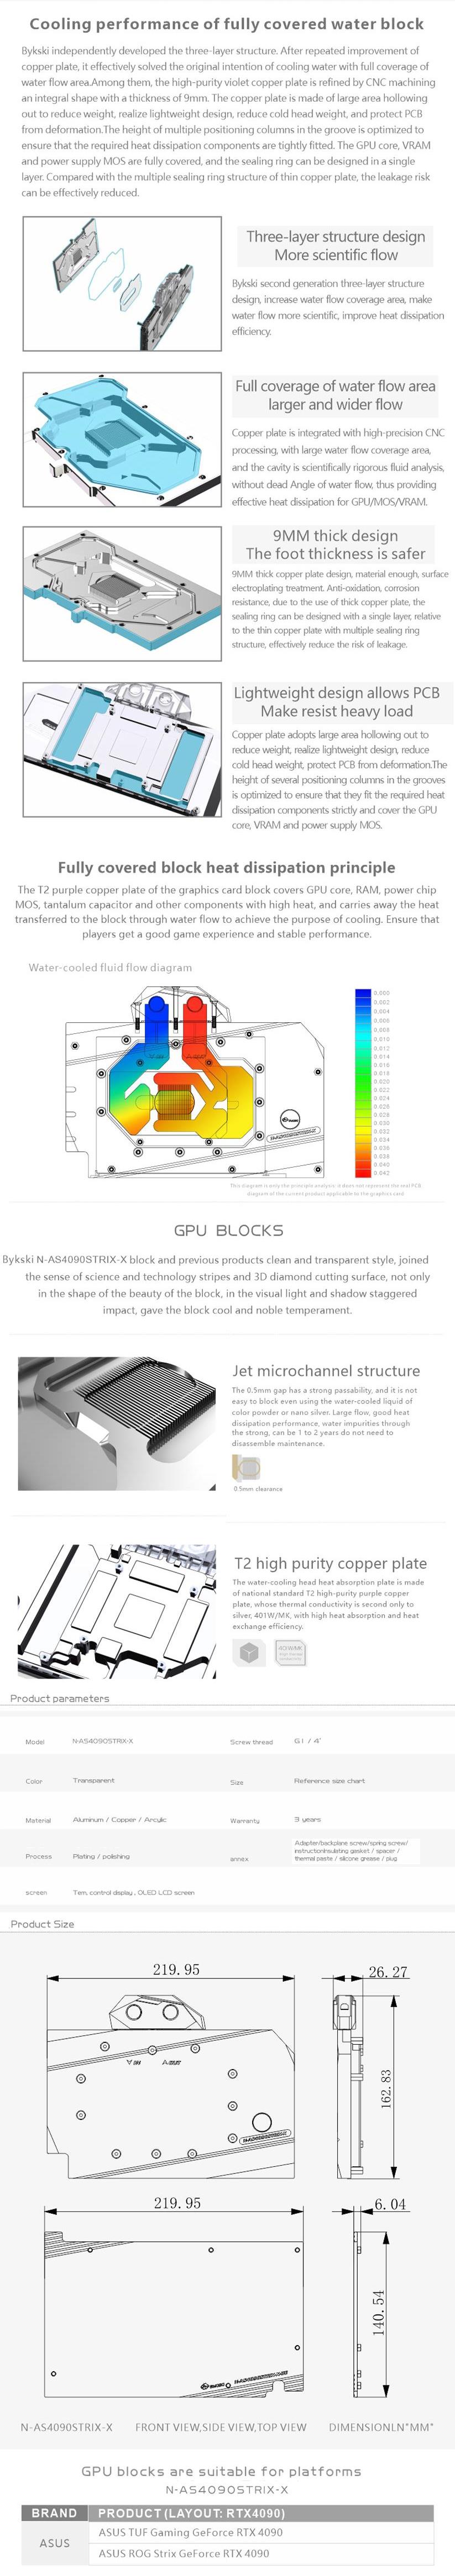 A large marketing image providing additional information about the product Bykski RTX 4090 RBW GPU Waterblock for ASUS ROG Strix-X & ASUS TUF  w/ Backplate - Additional alt info not provided